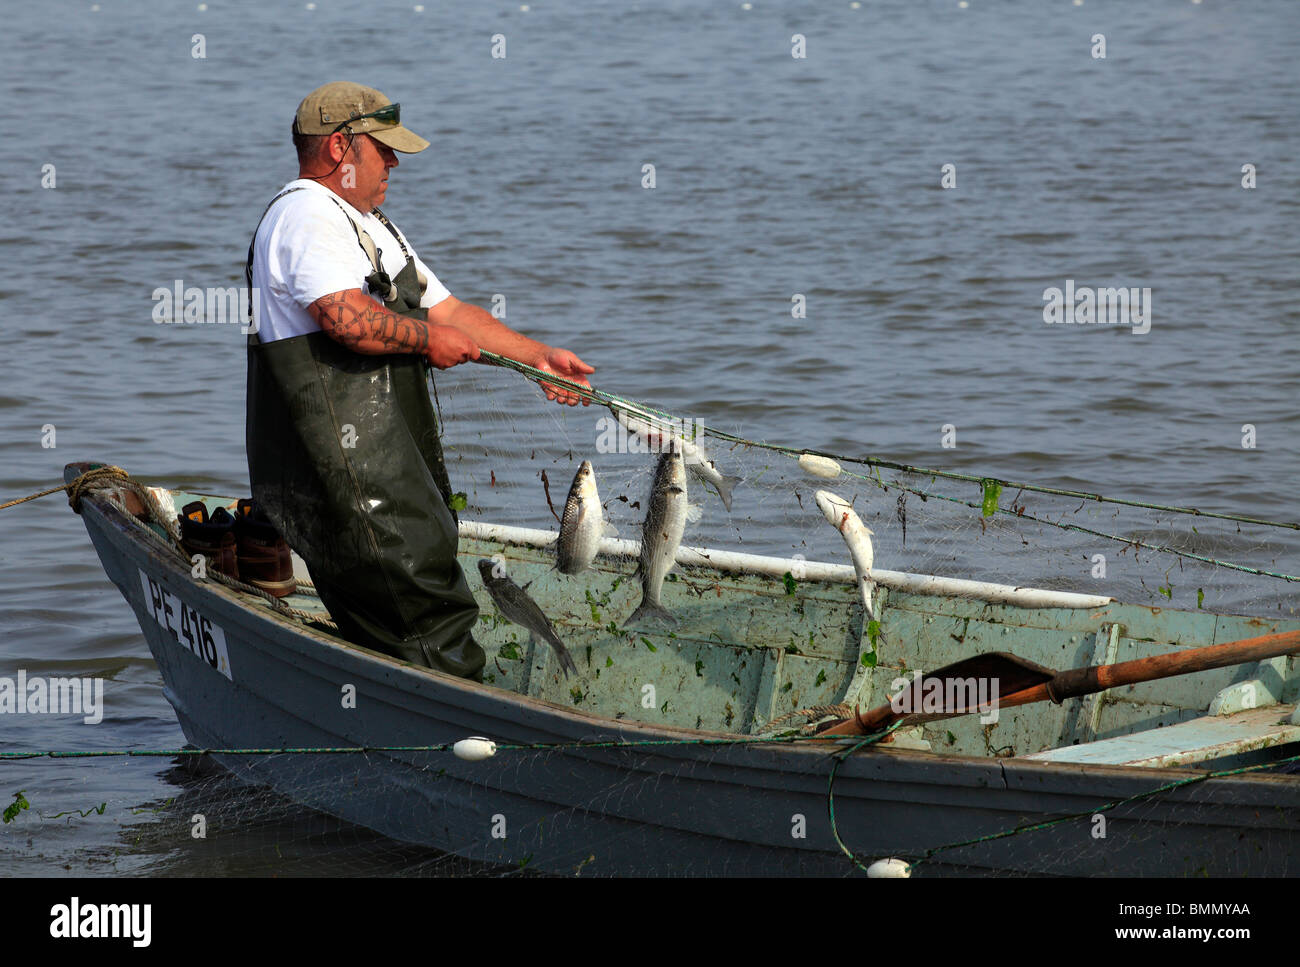 Fisherman catching Mullet from netting at Mudeford, Christchurch Harbour. Stock Photo